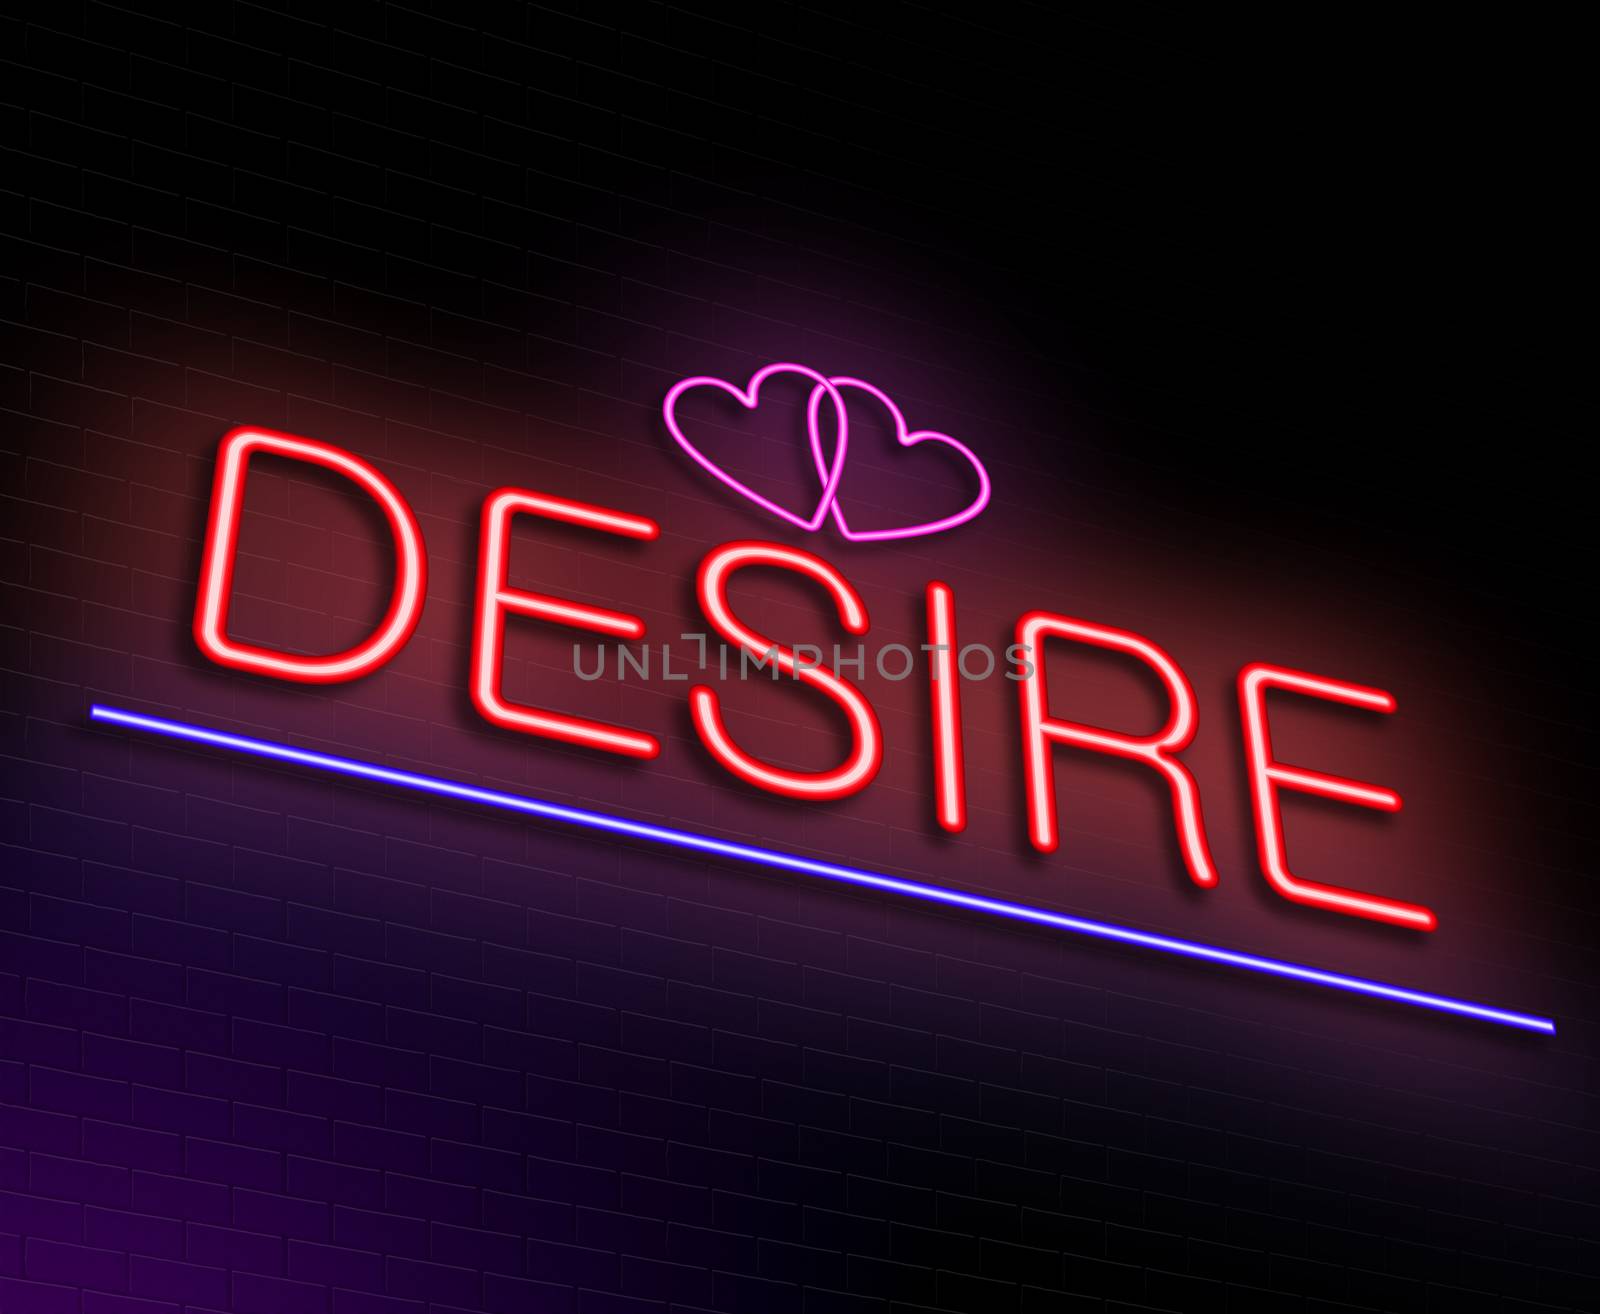 Illustration depicting an illuminated neon sign with a desire concept.